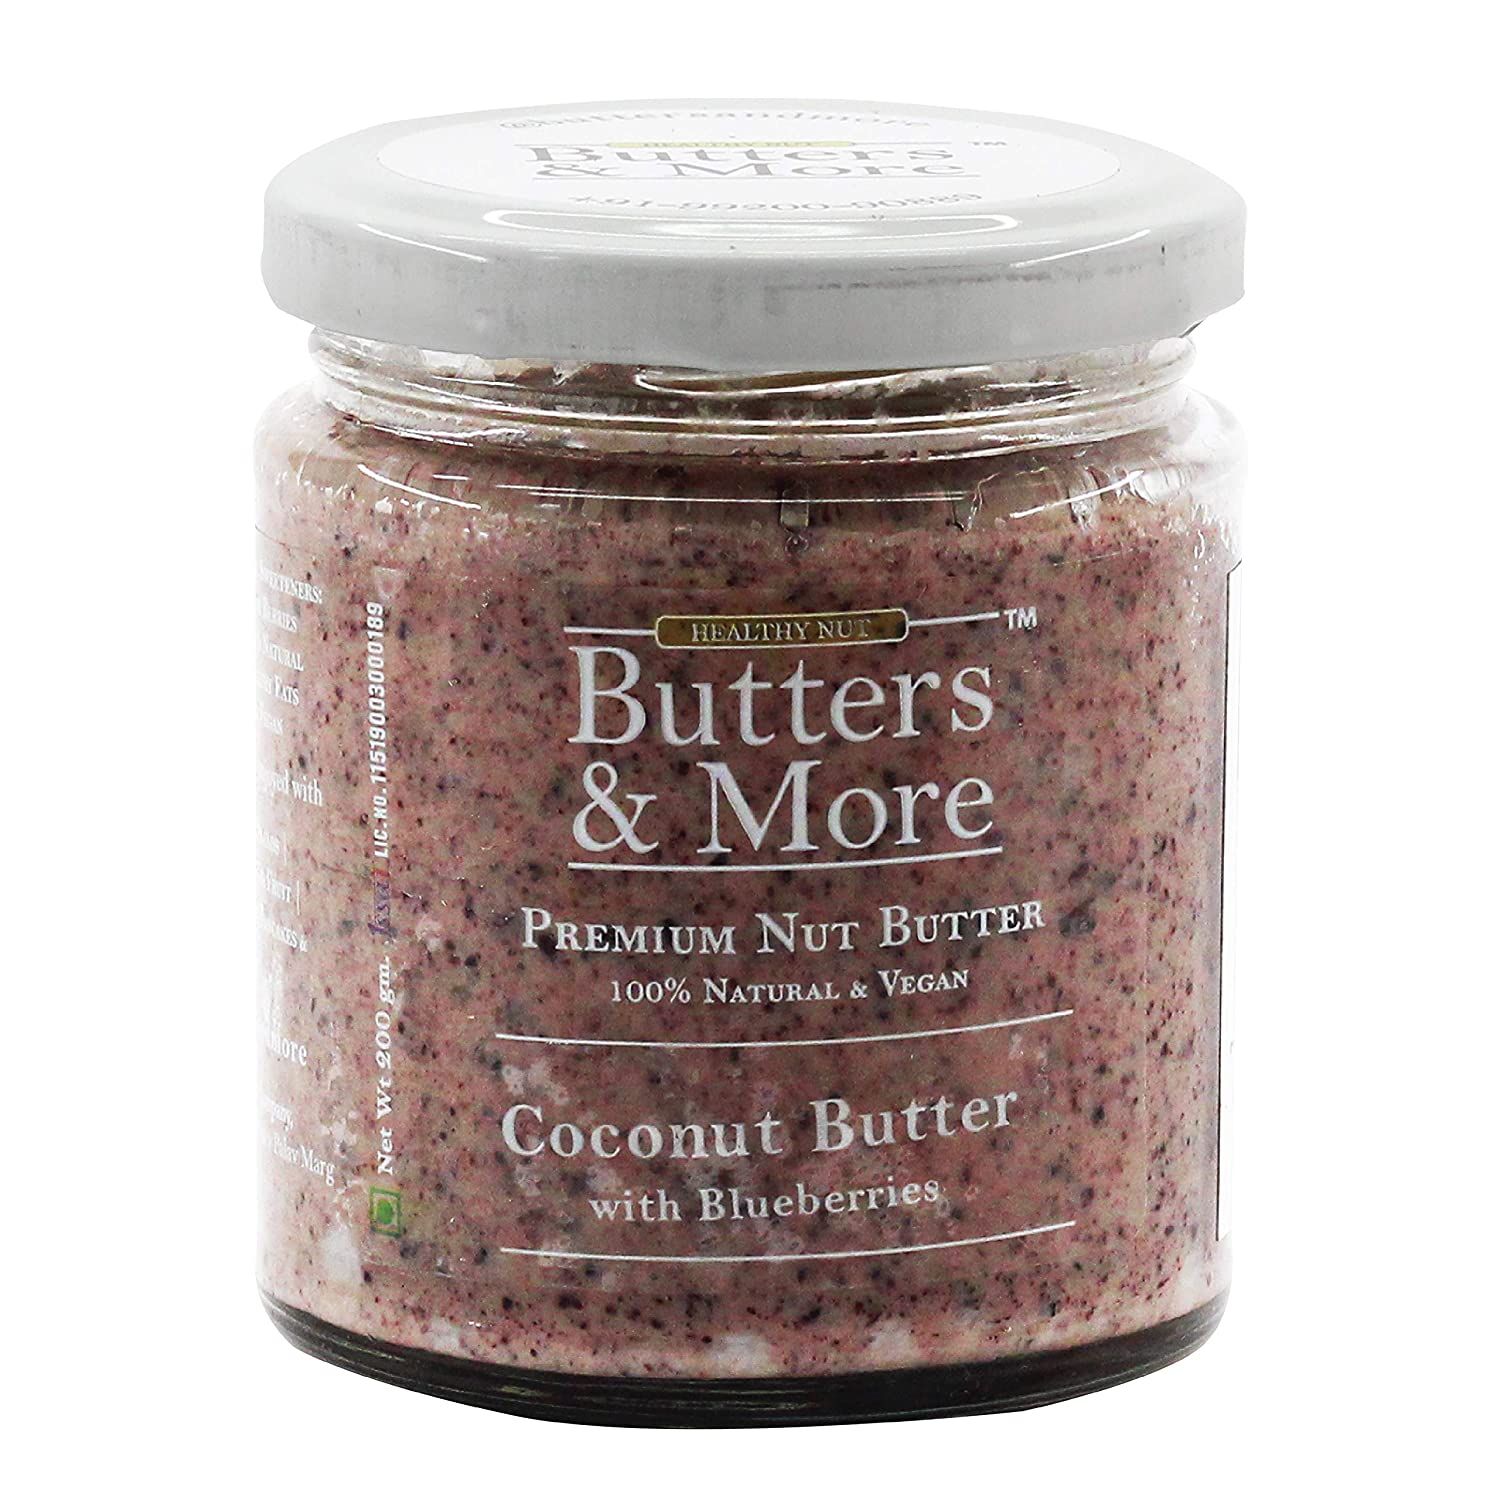 Butters & More Vegan Coconut Butter with Real Blueberries Image